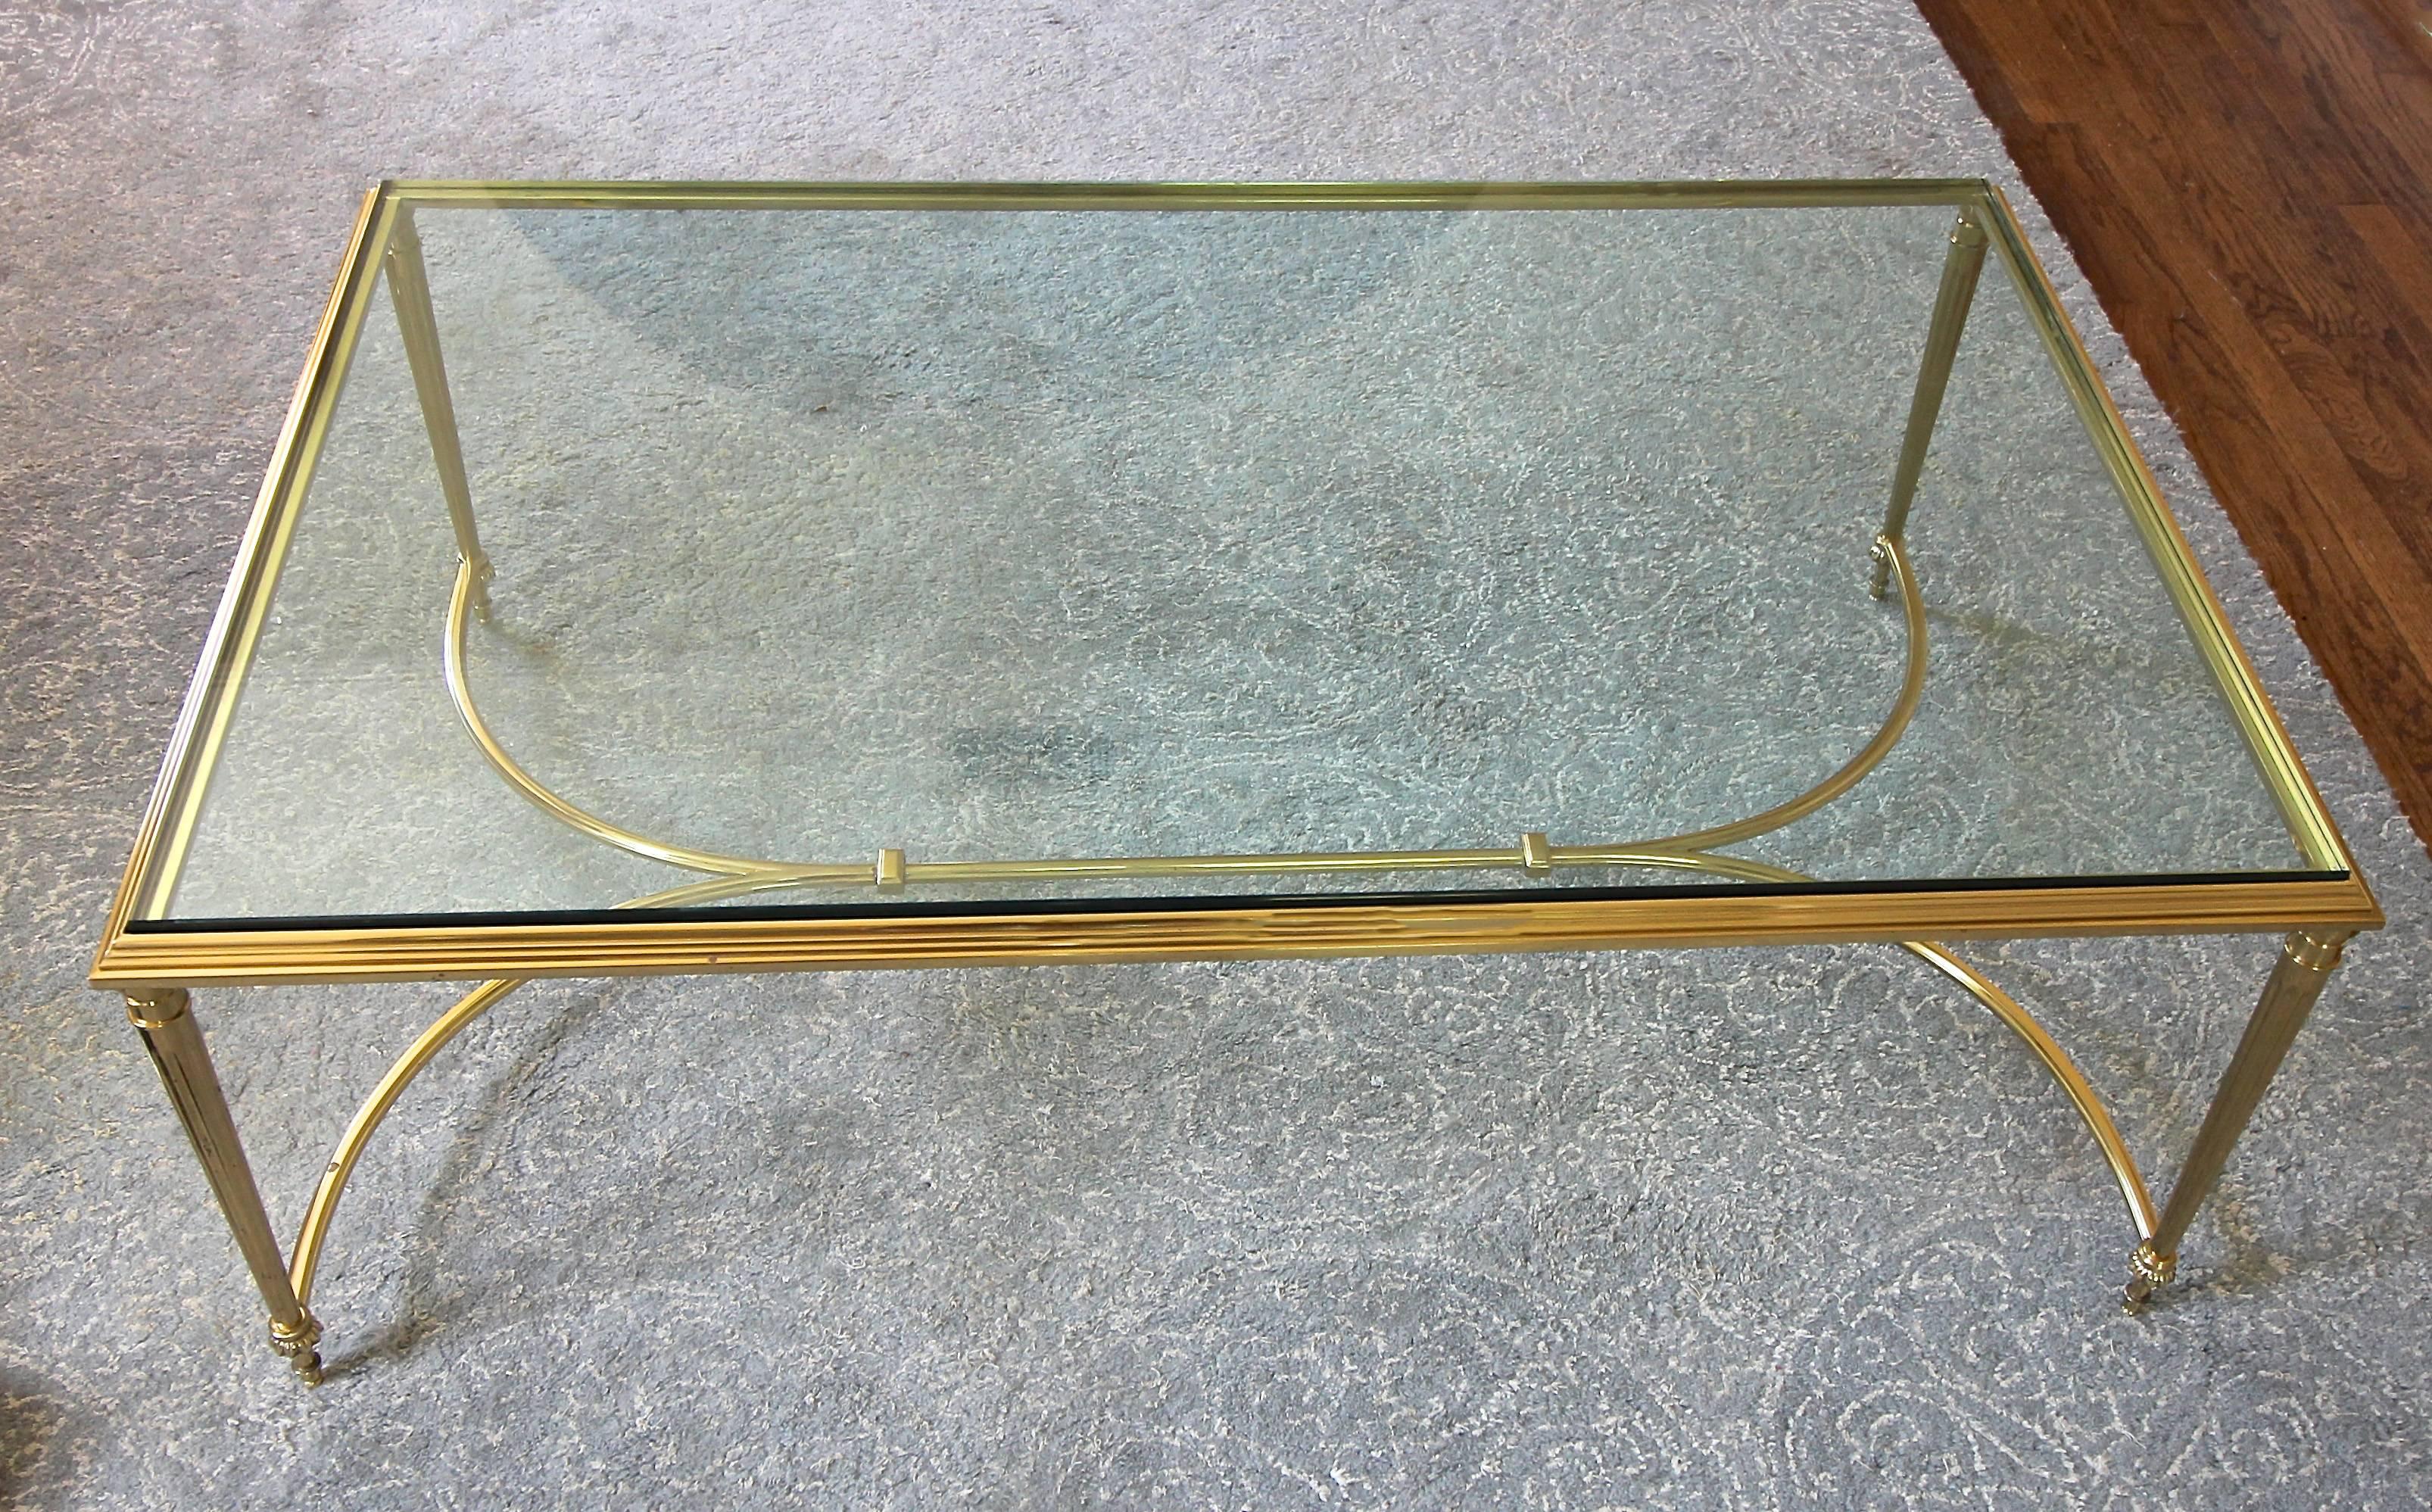 Large-scale cocktail or coffee table beautifully crafted from solid brass in the French Louis XVI style with fluted column legs, detailed stretcher and decorative escutcheons at base. Thick and heavy clear inset glass top. Table is extremely well